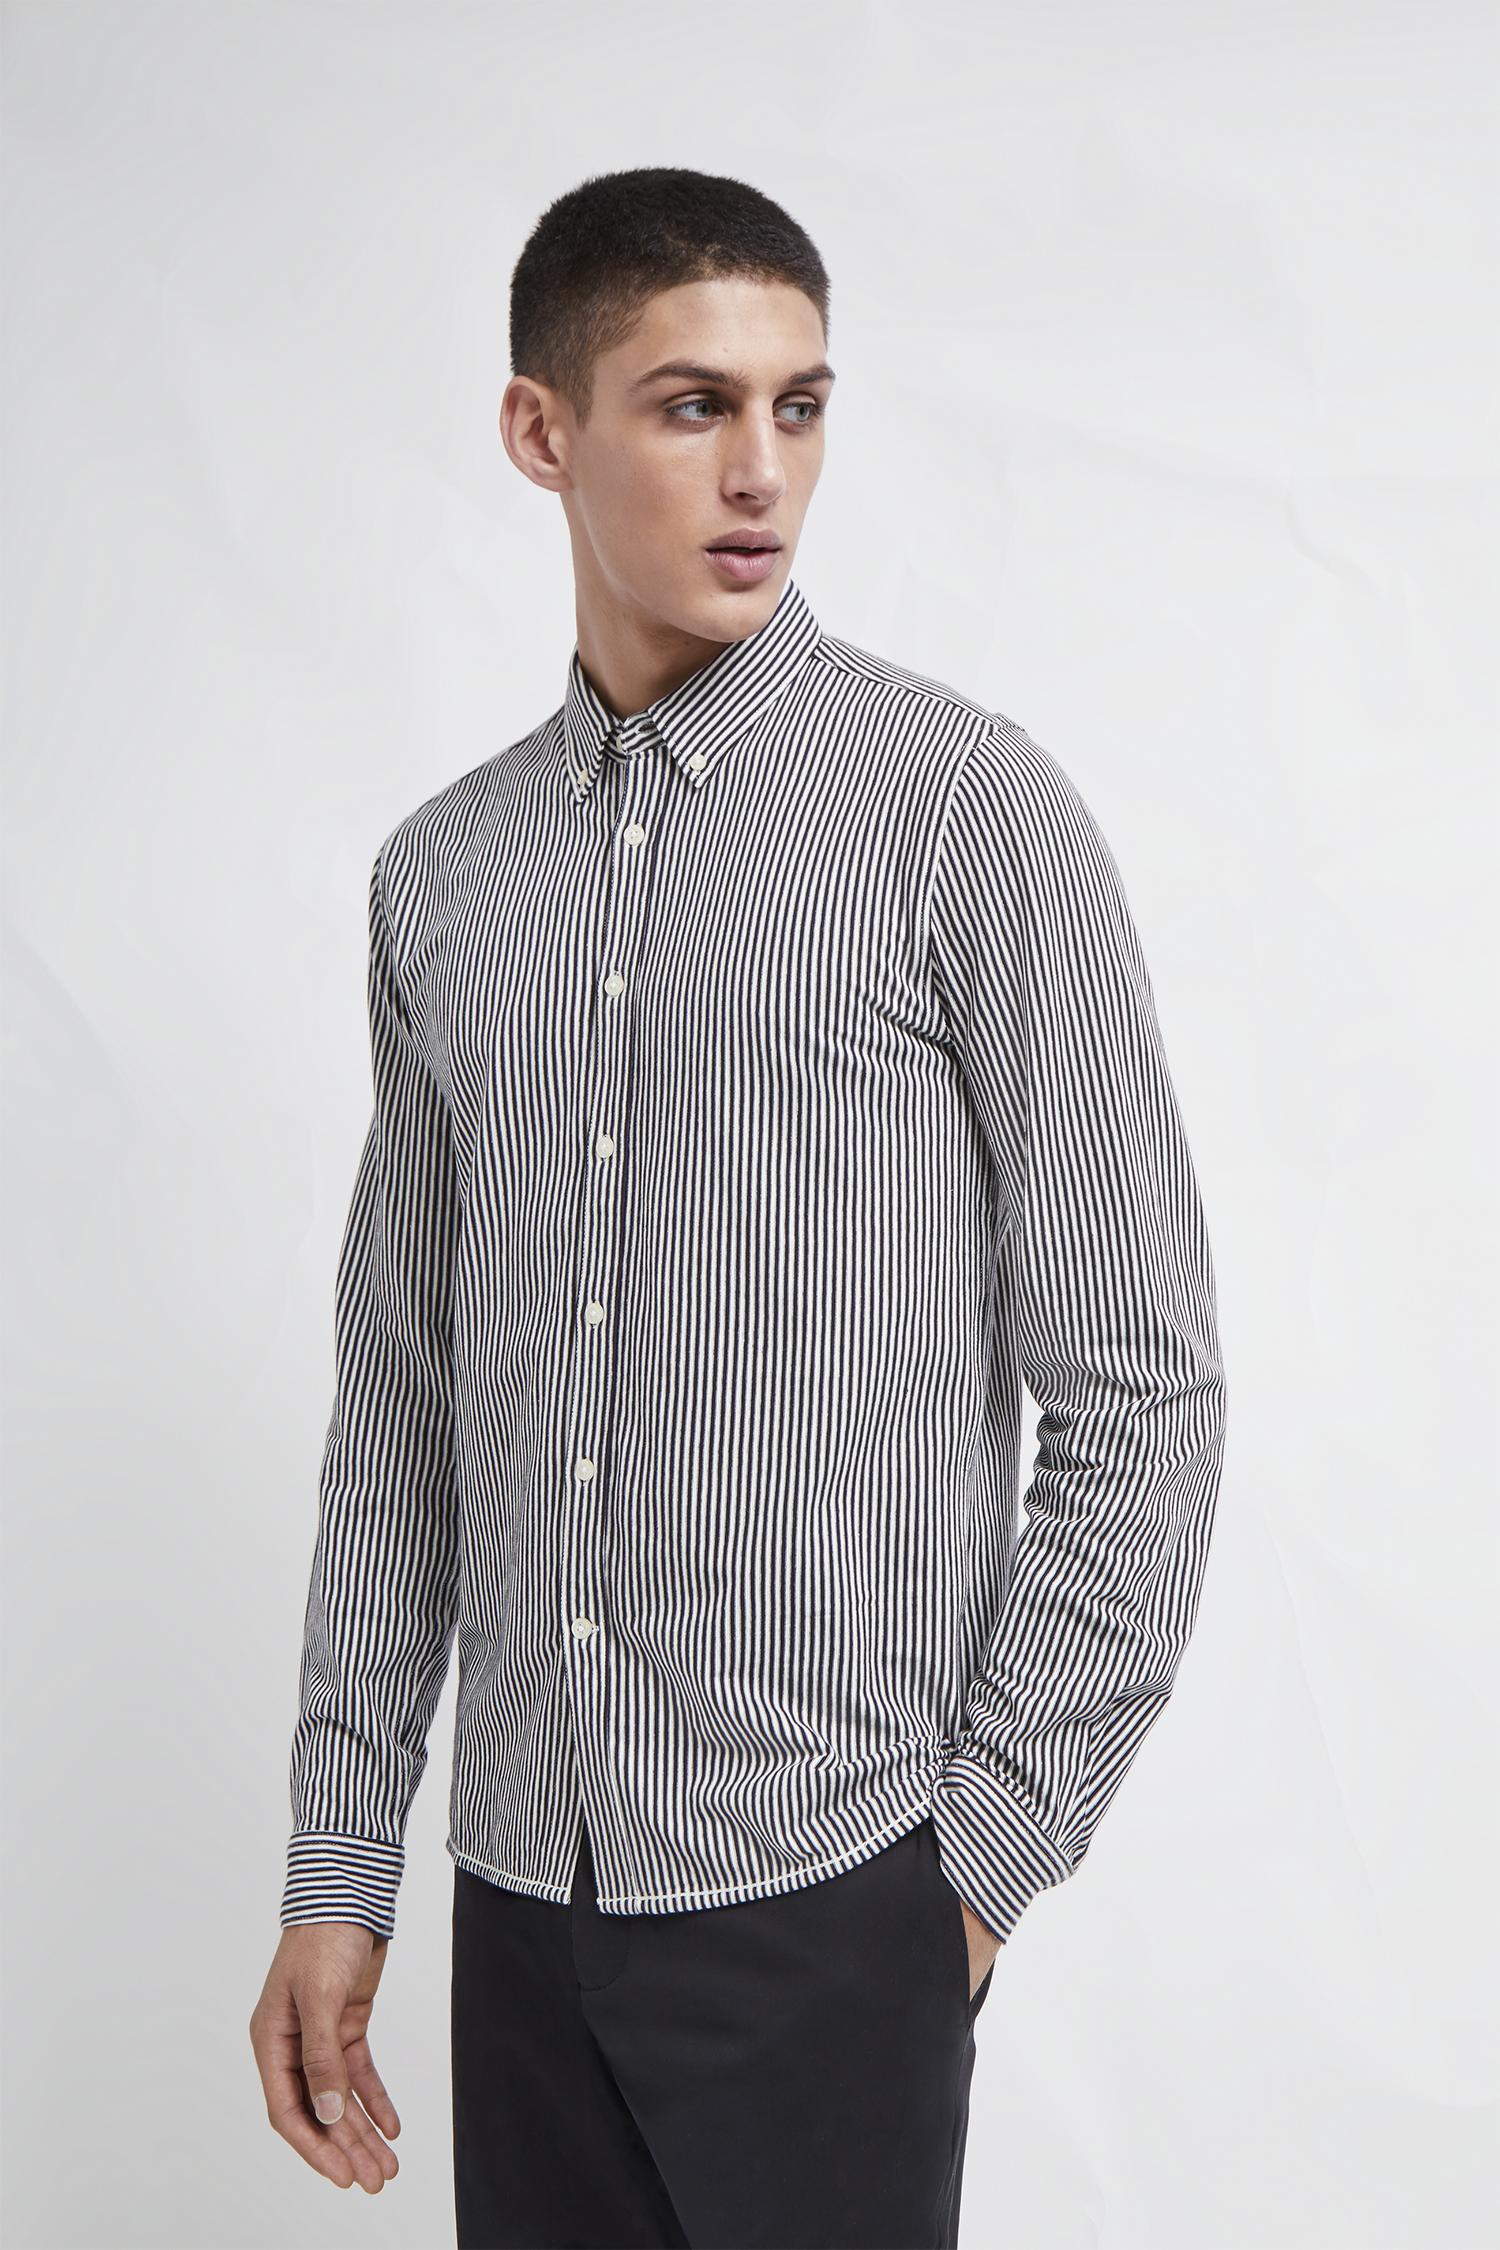 French Connection Cotton Micro Stripe Jersey Shirt in Blue for Men - Lyst